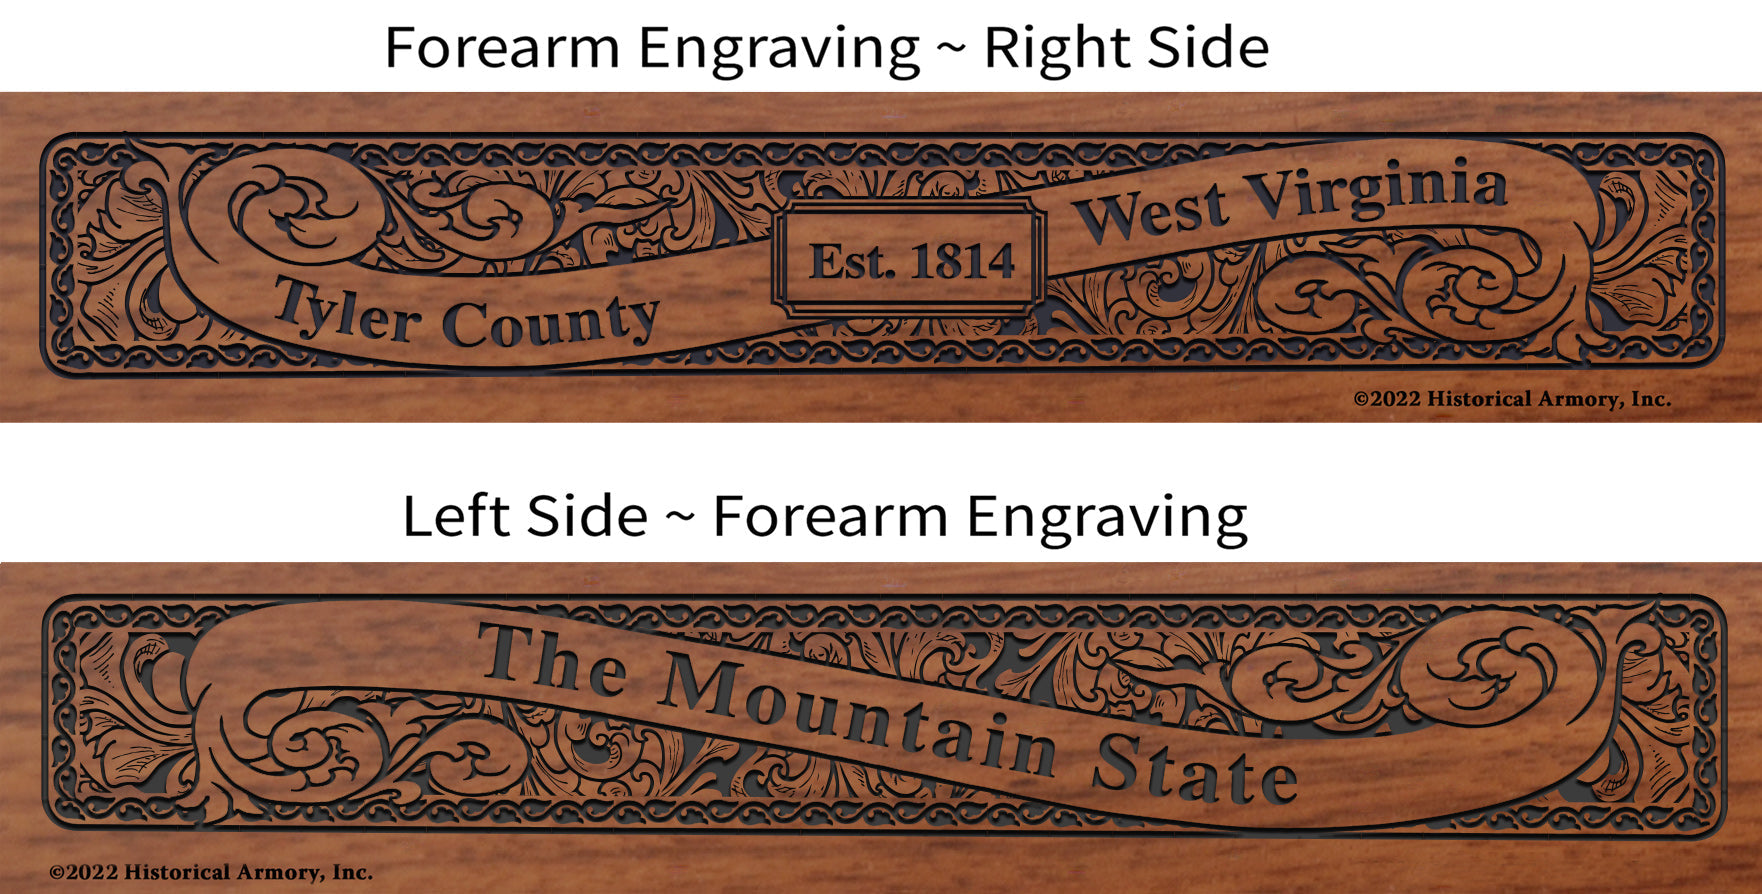 Tyler County West Virginia Engraved Rifle Forearm